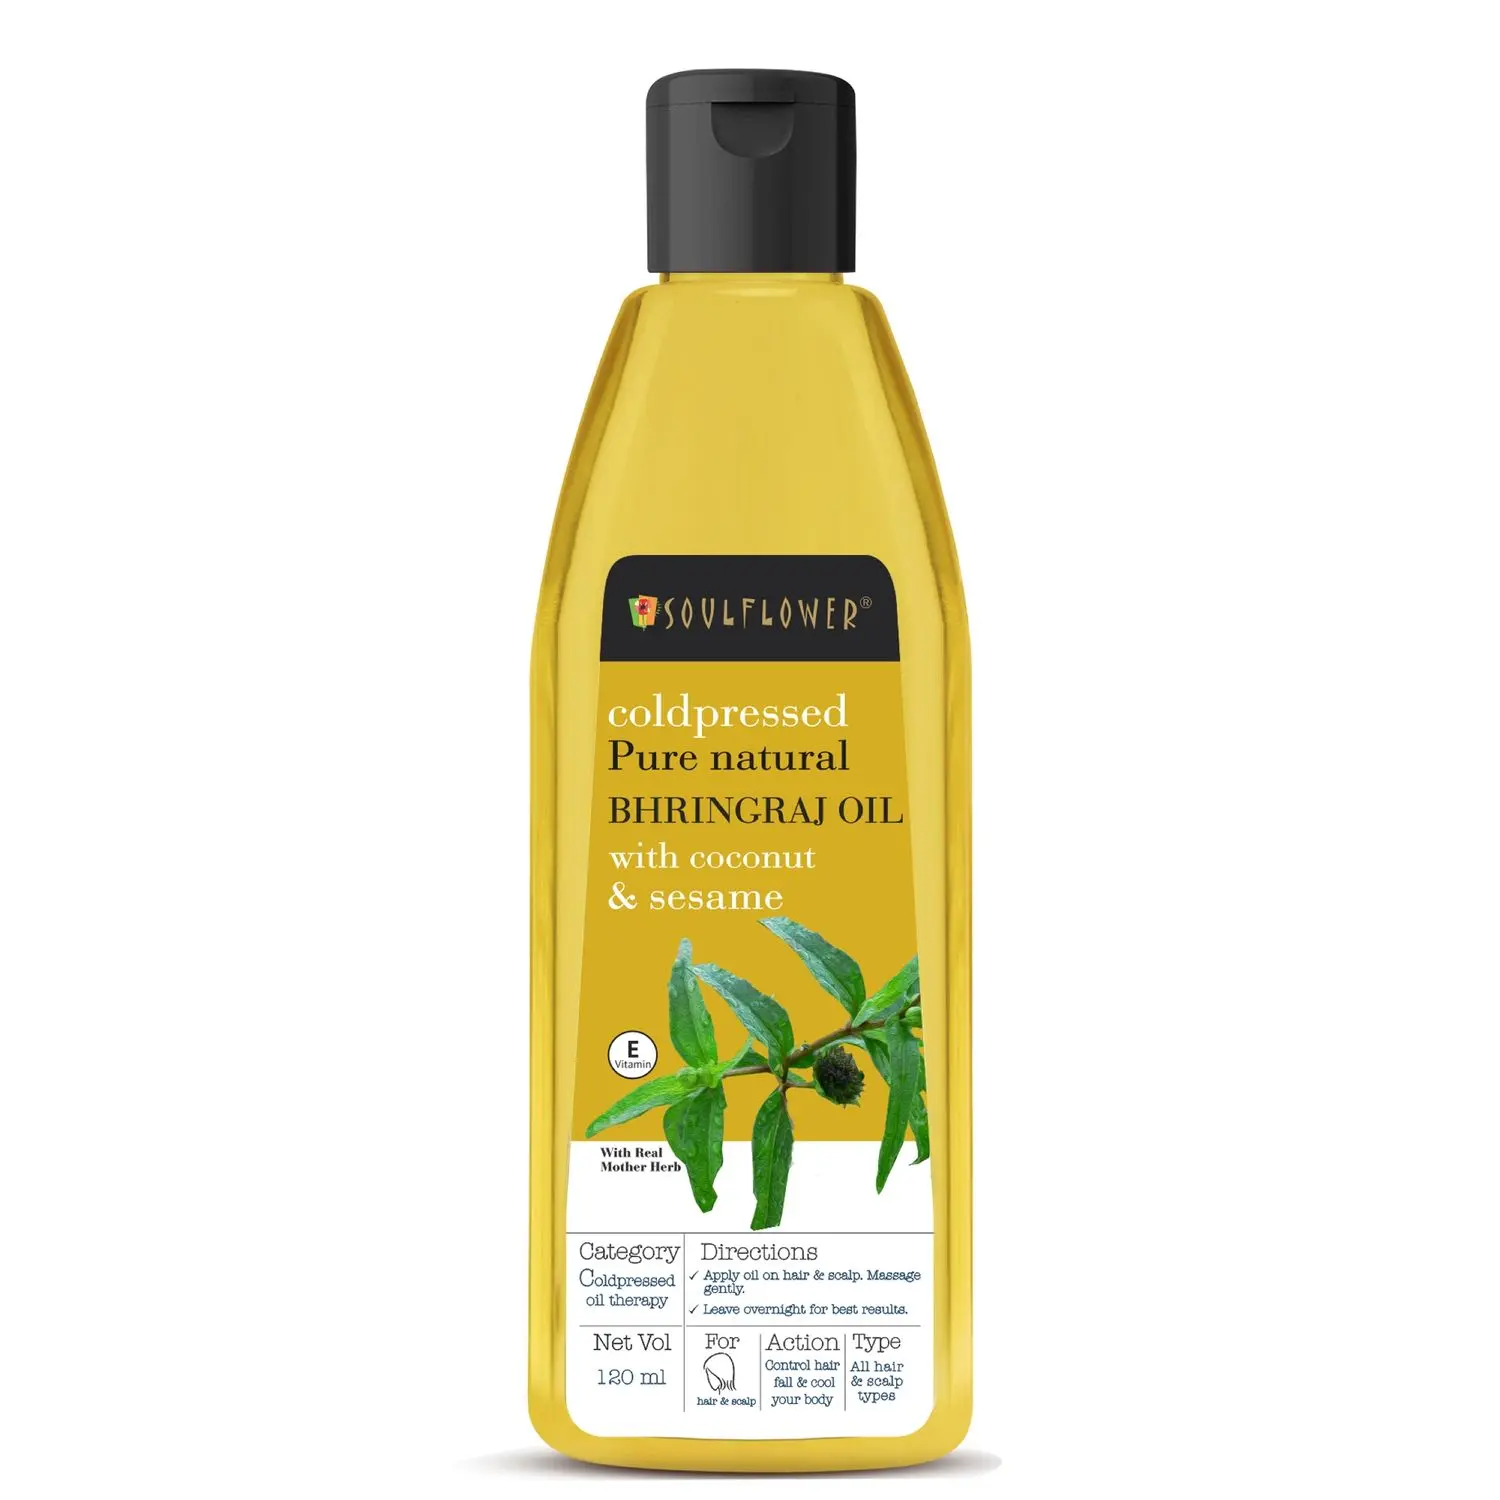 Soulflower Natural Bhringraj Oil with Coconut And Sesame, 120ml